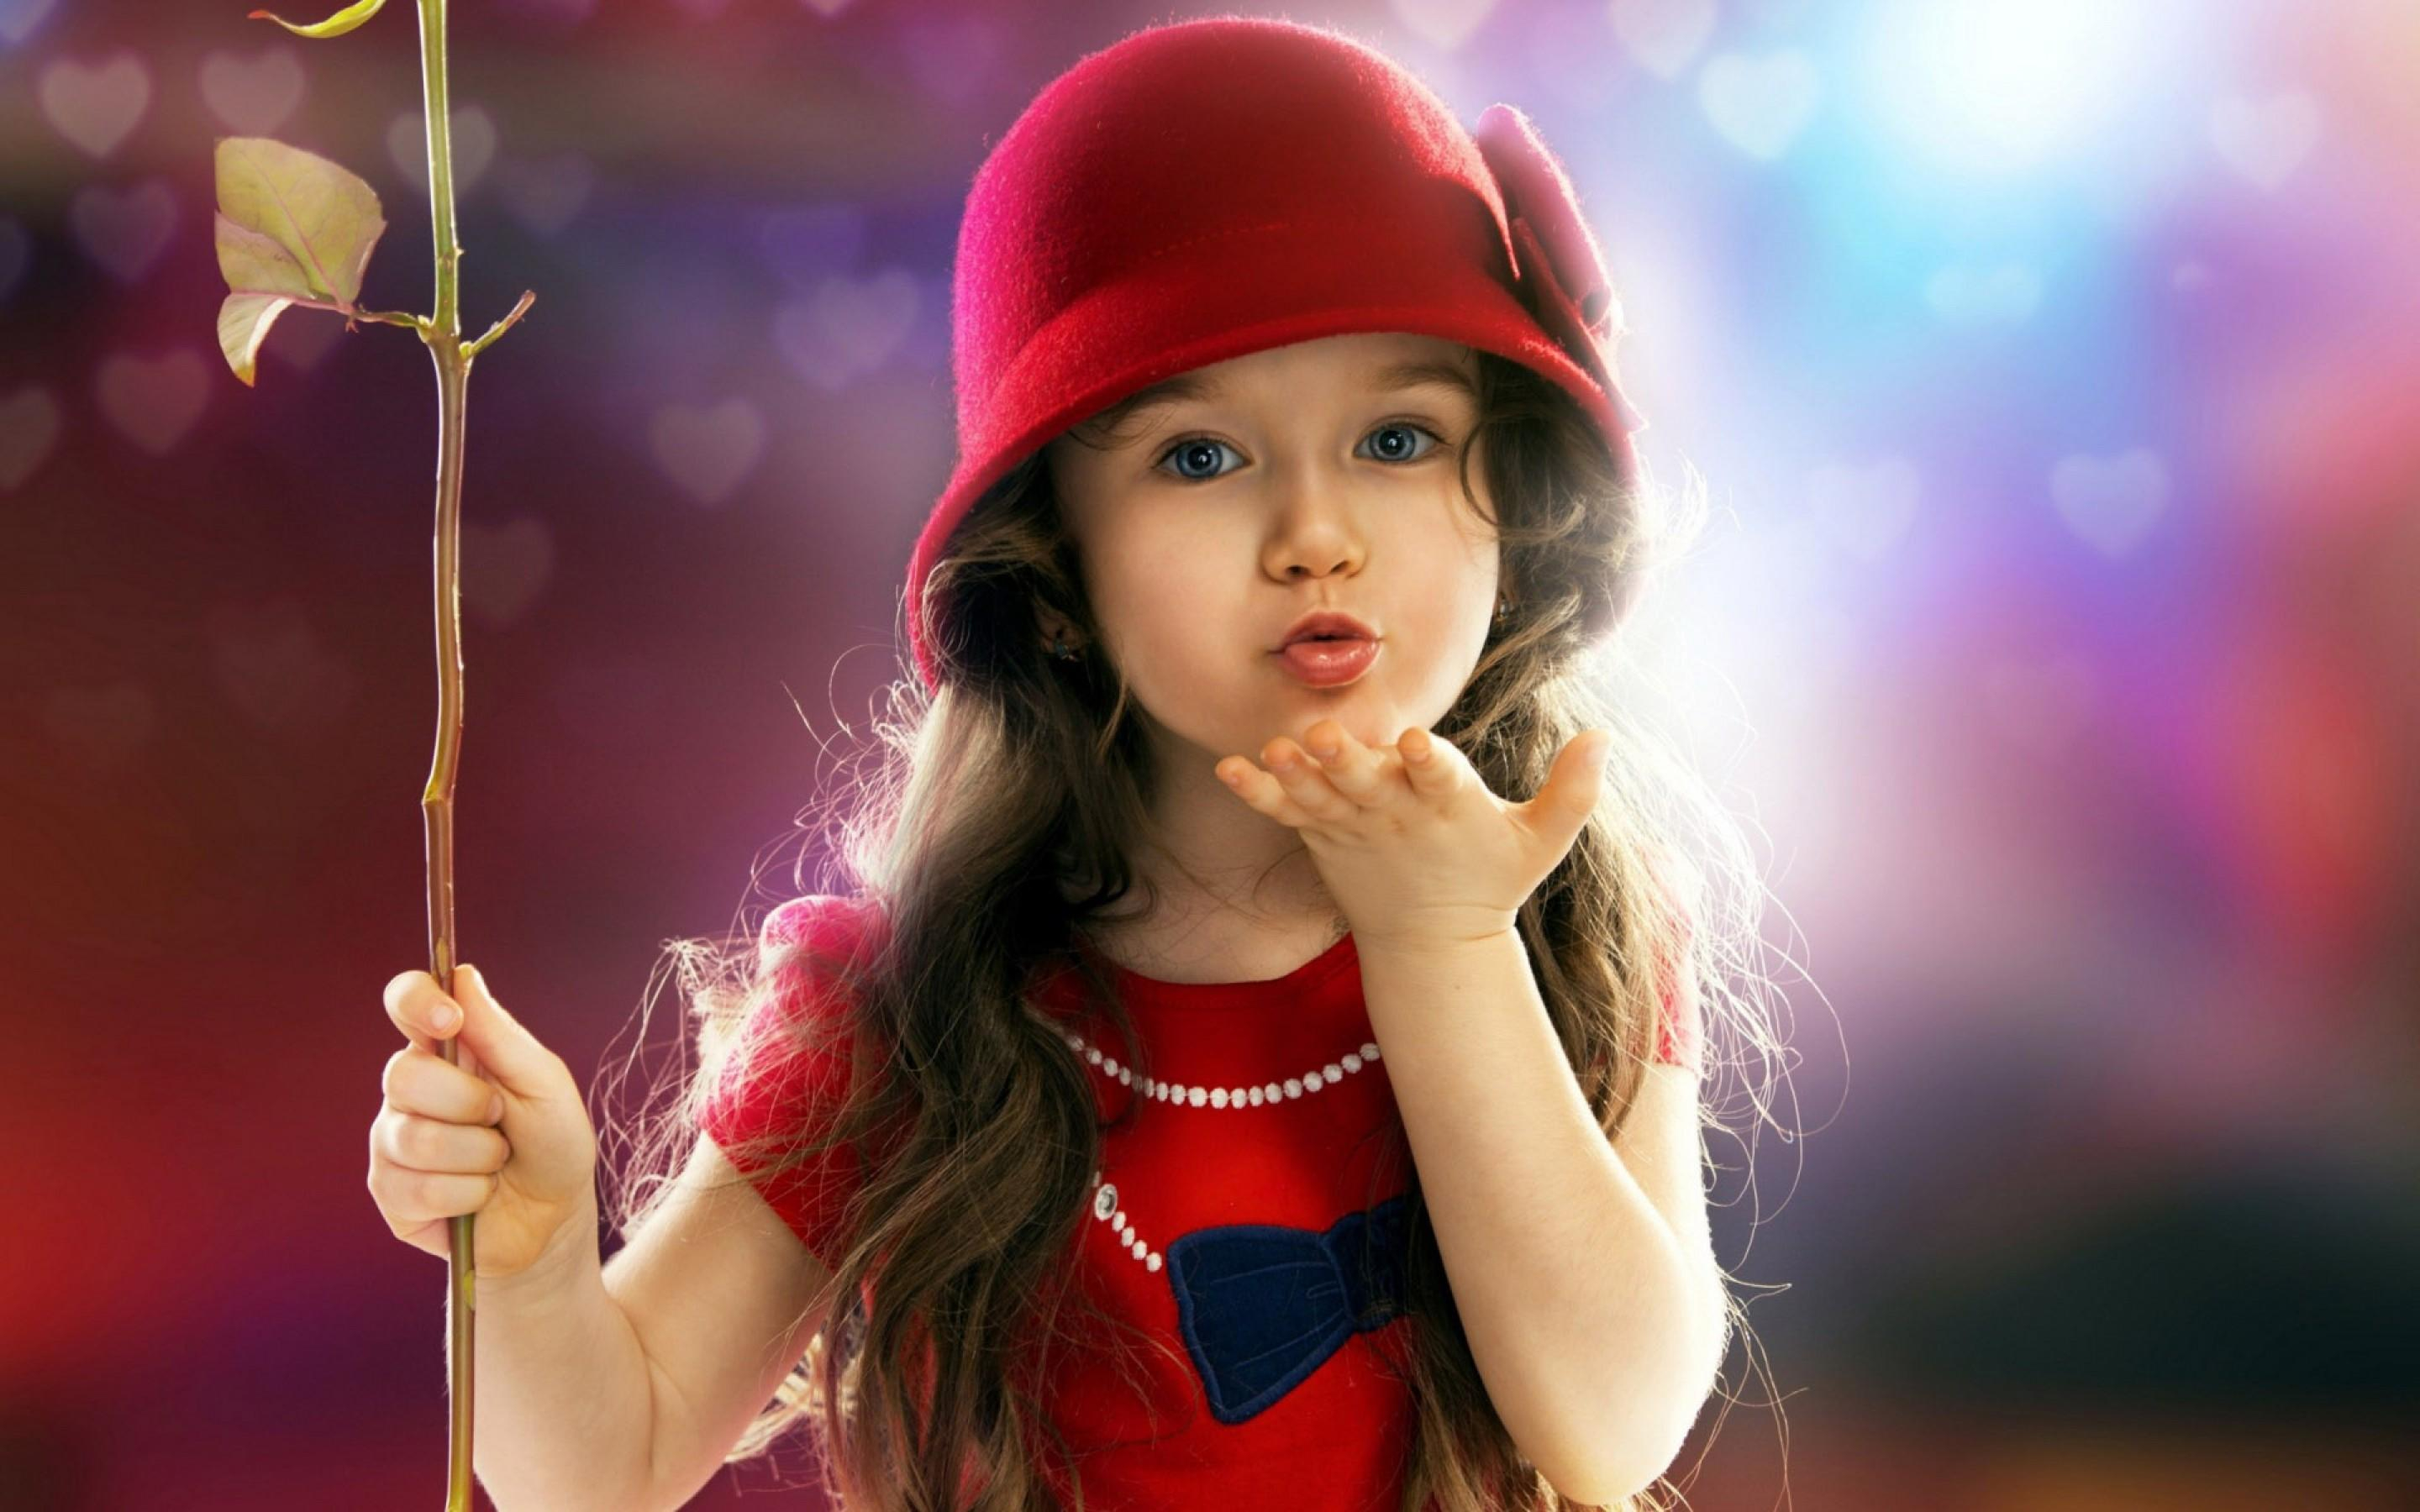 Luxury Cute Small Girl Baby Photo. High Definition Wallpaper